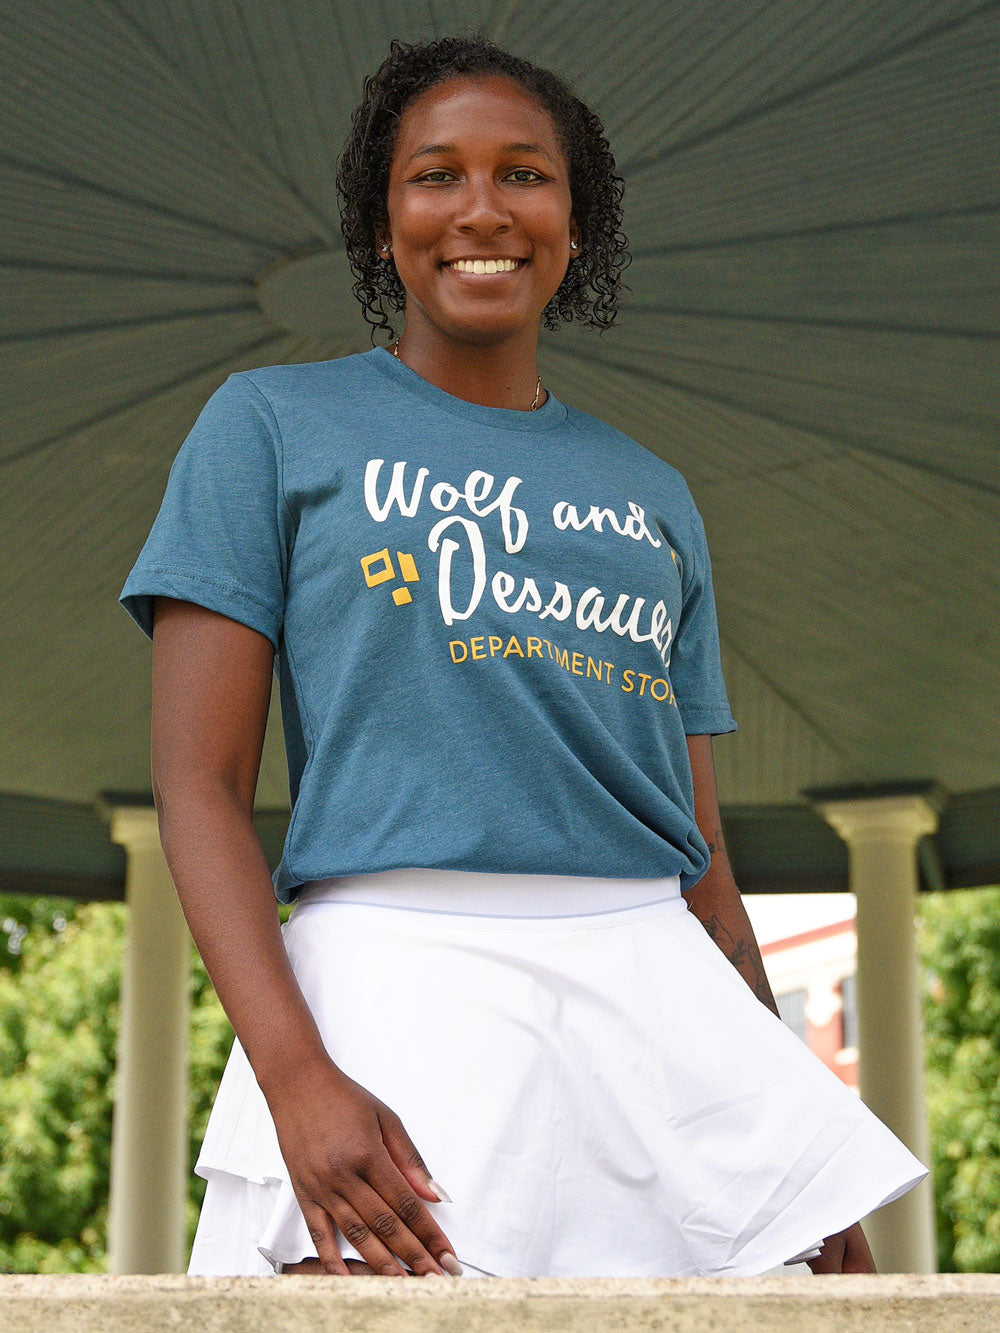 Wolf and Dessauer Department Store teal heather t-shirt on model in bandstand